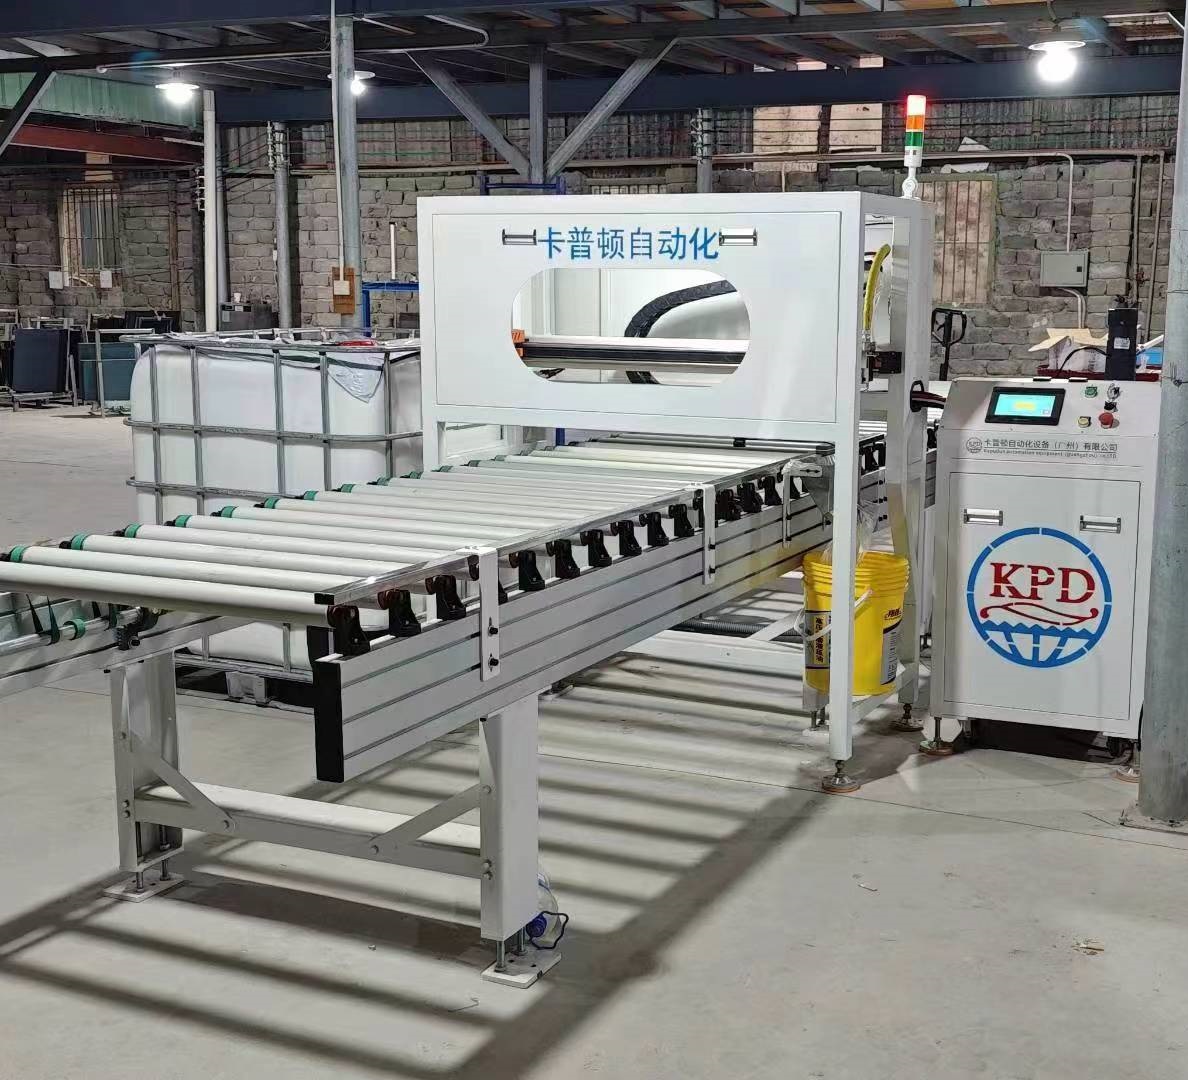 Glue Spraying Machine for Presses Fire-Proof Door MGO Panels Fefrigerated Truck Body Panels